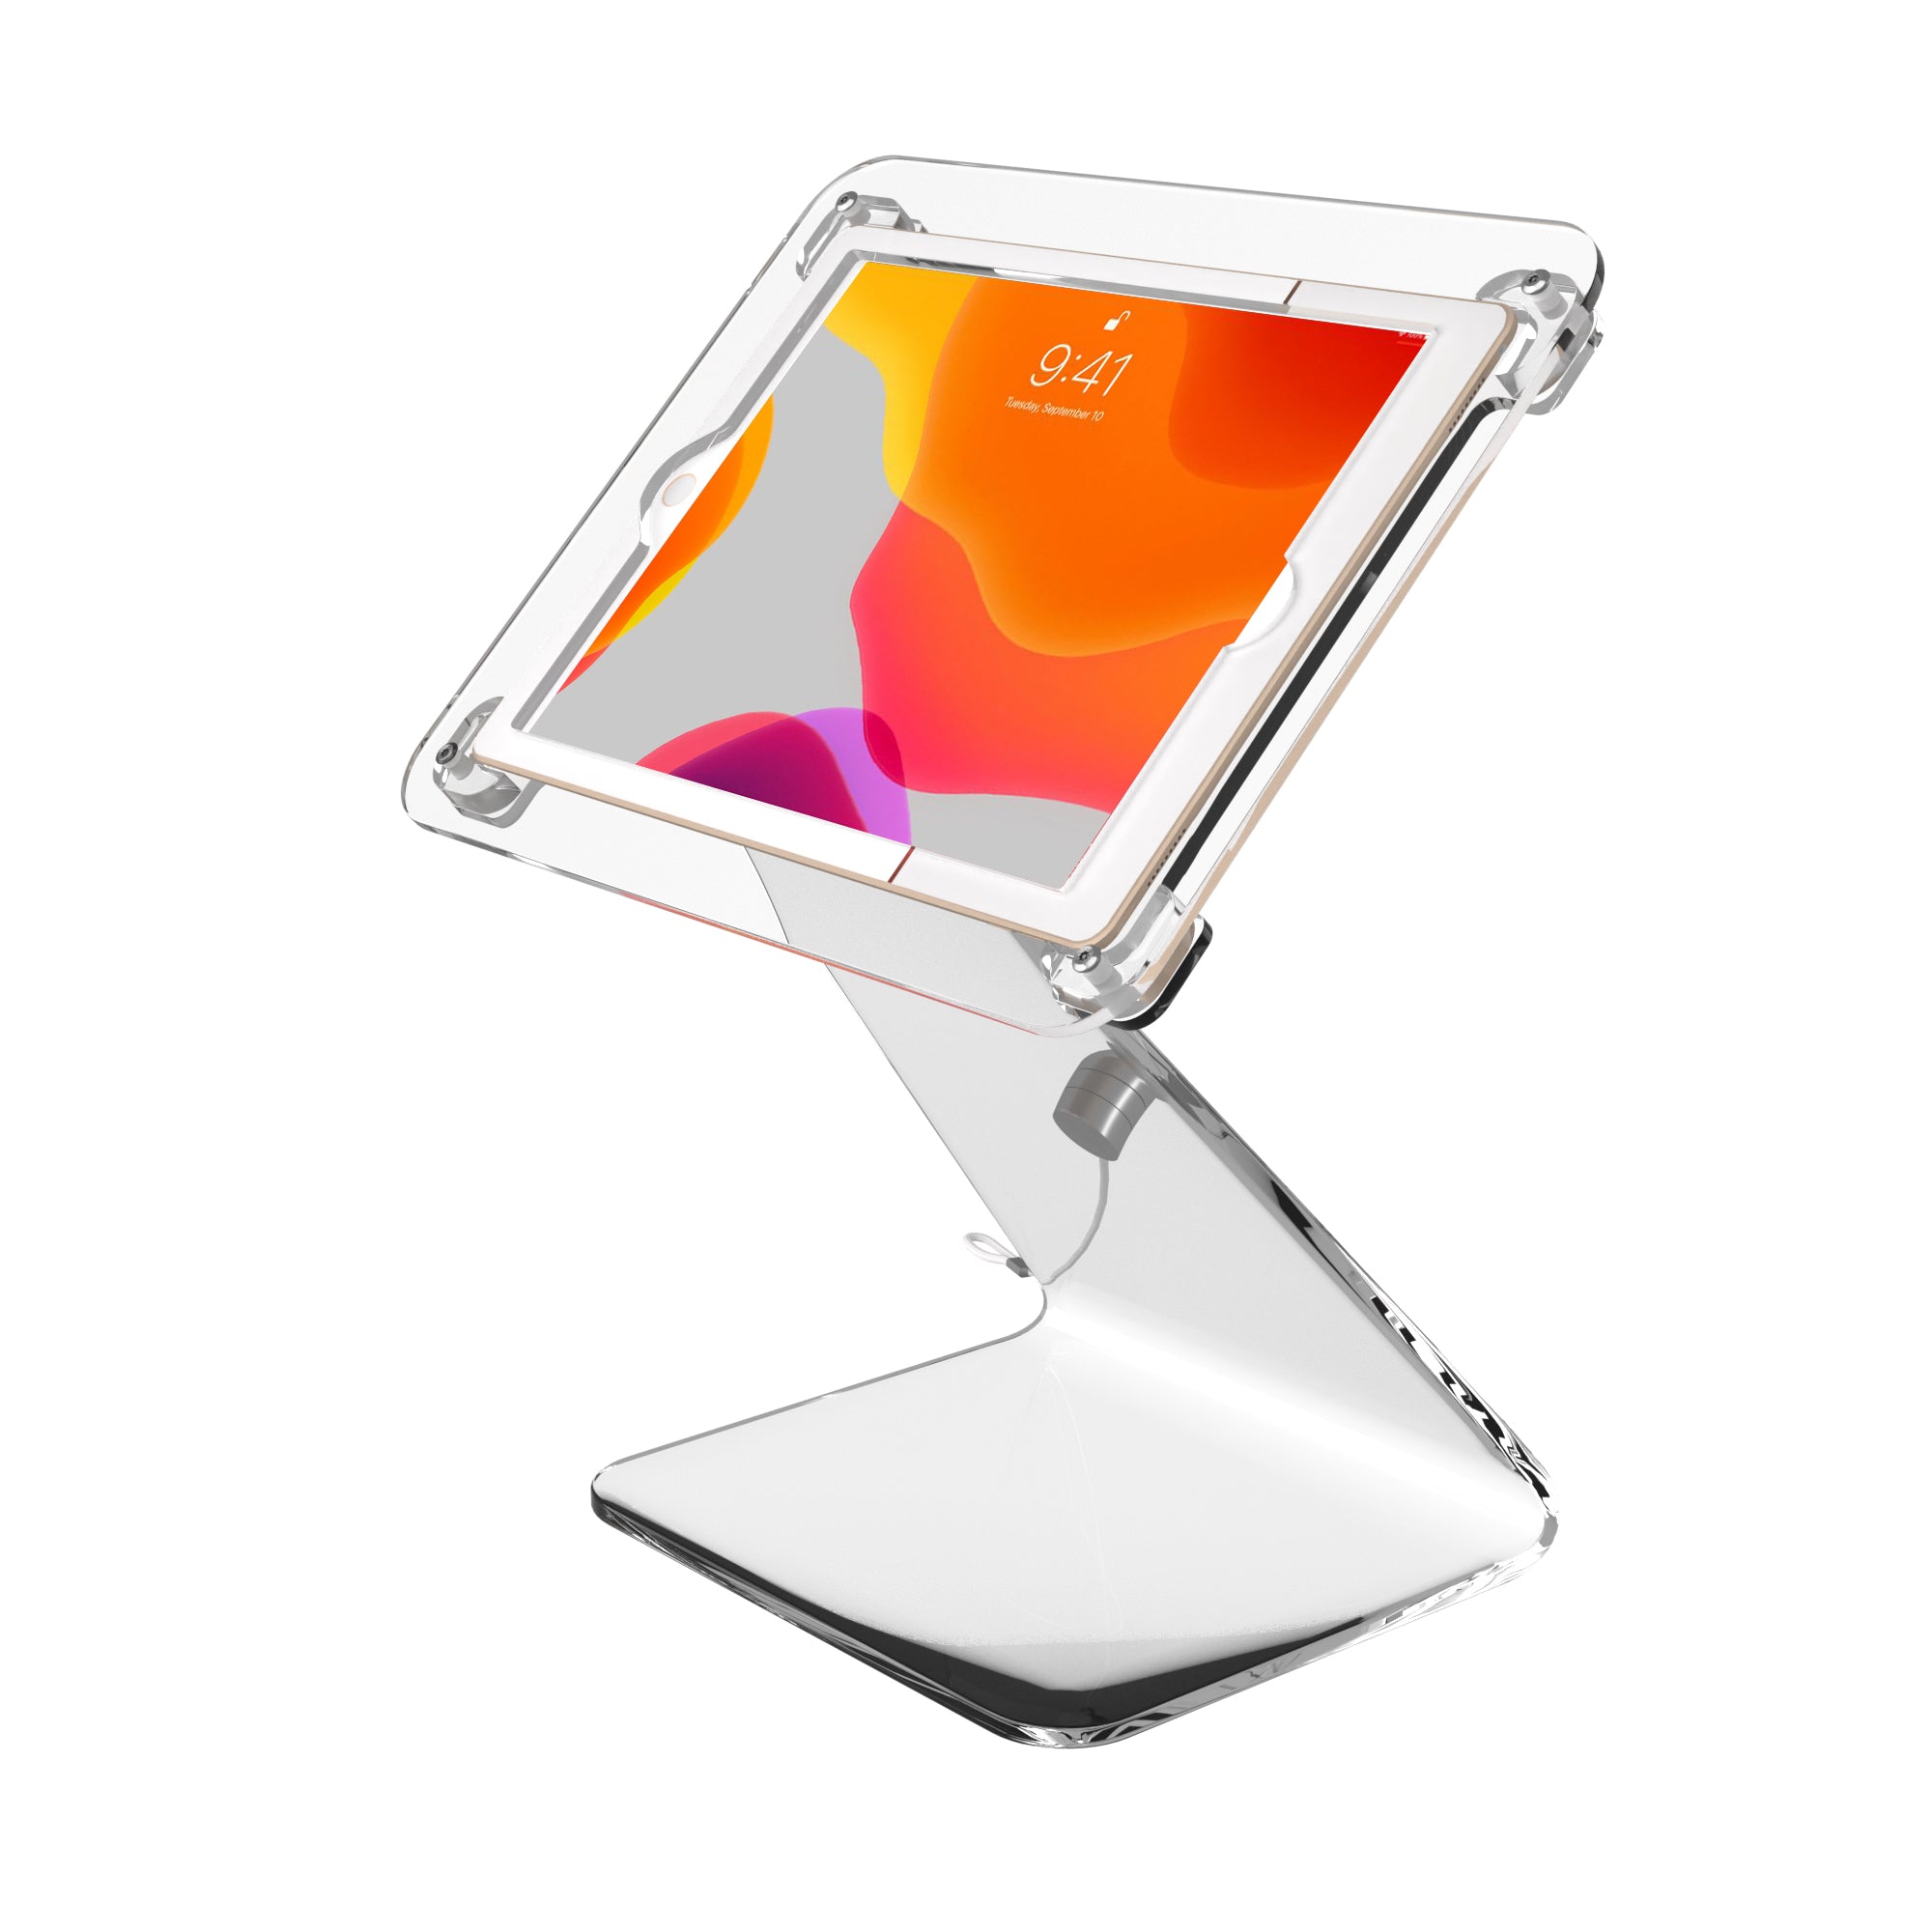 Premium Security Translucent Acrylic Kiosk for 10.2-inch iPad (7th/ 8th/ 9th Gen) & More